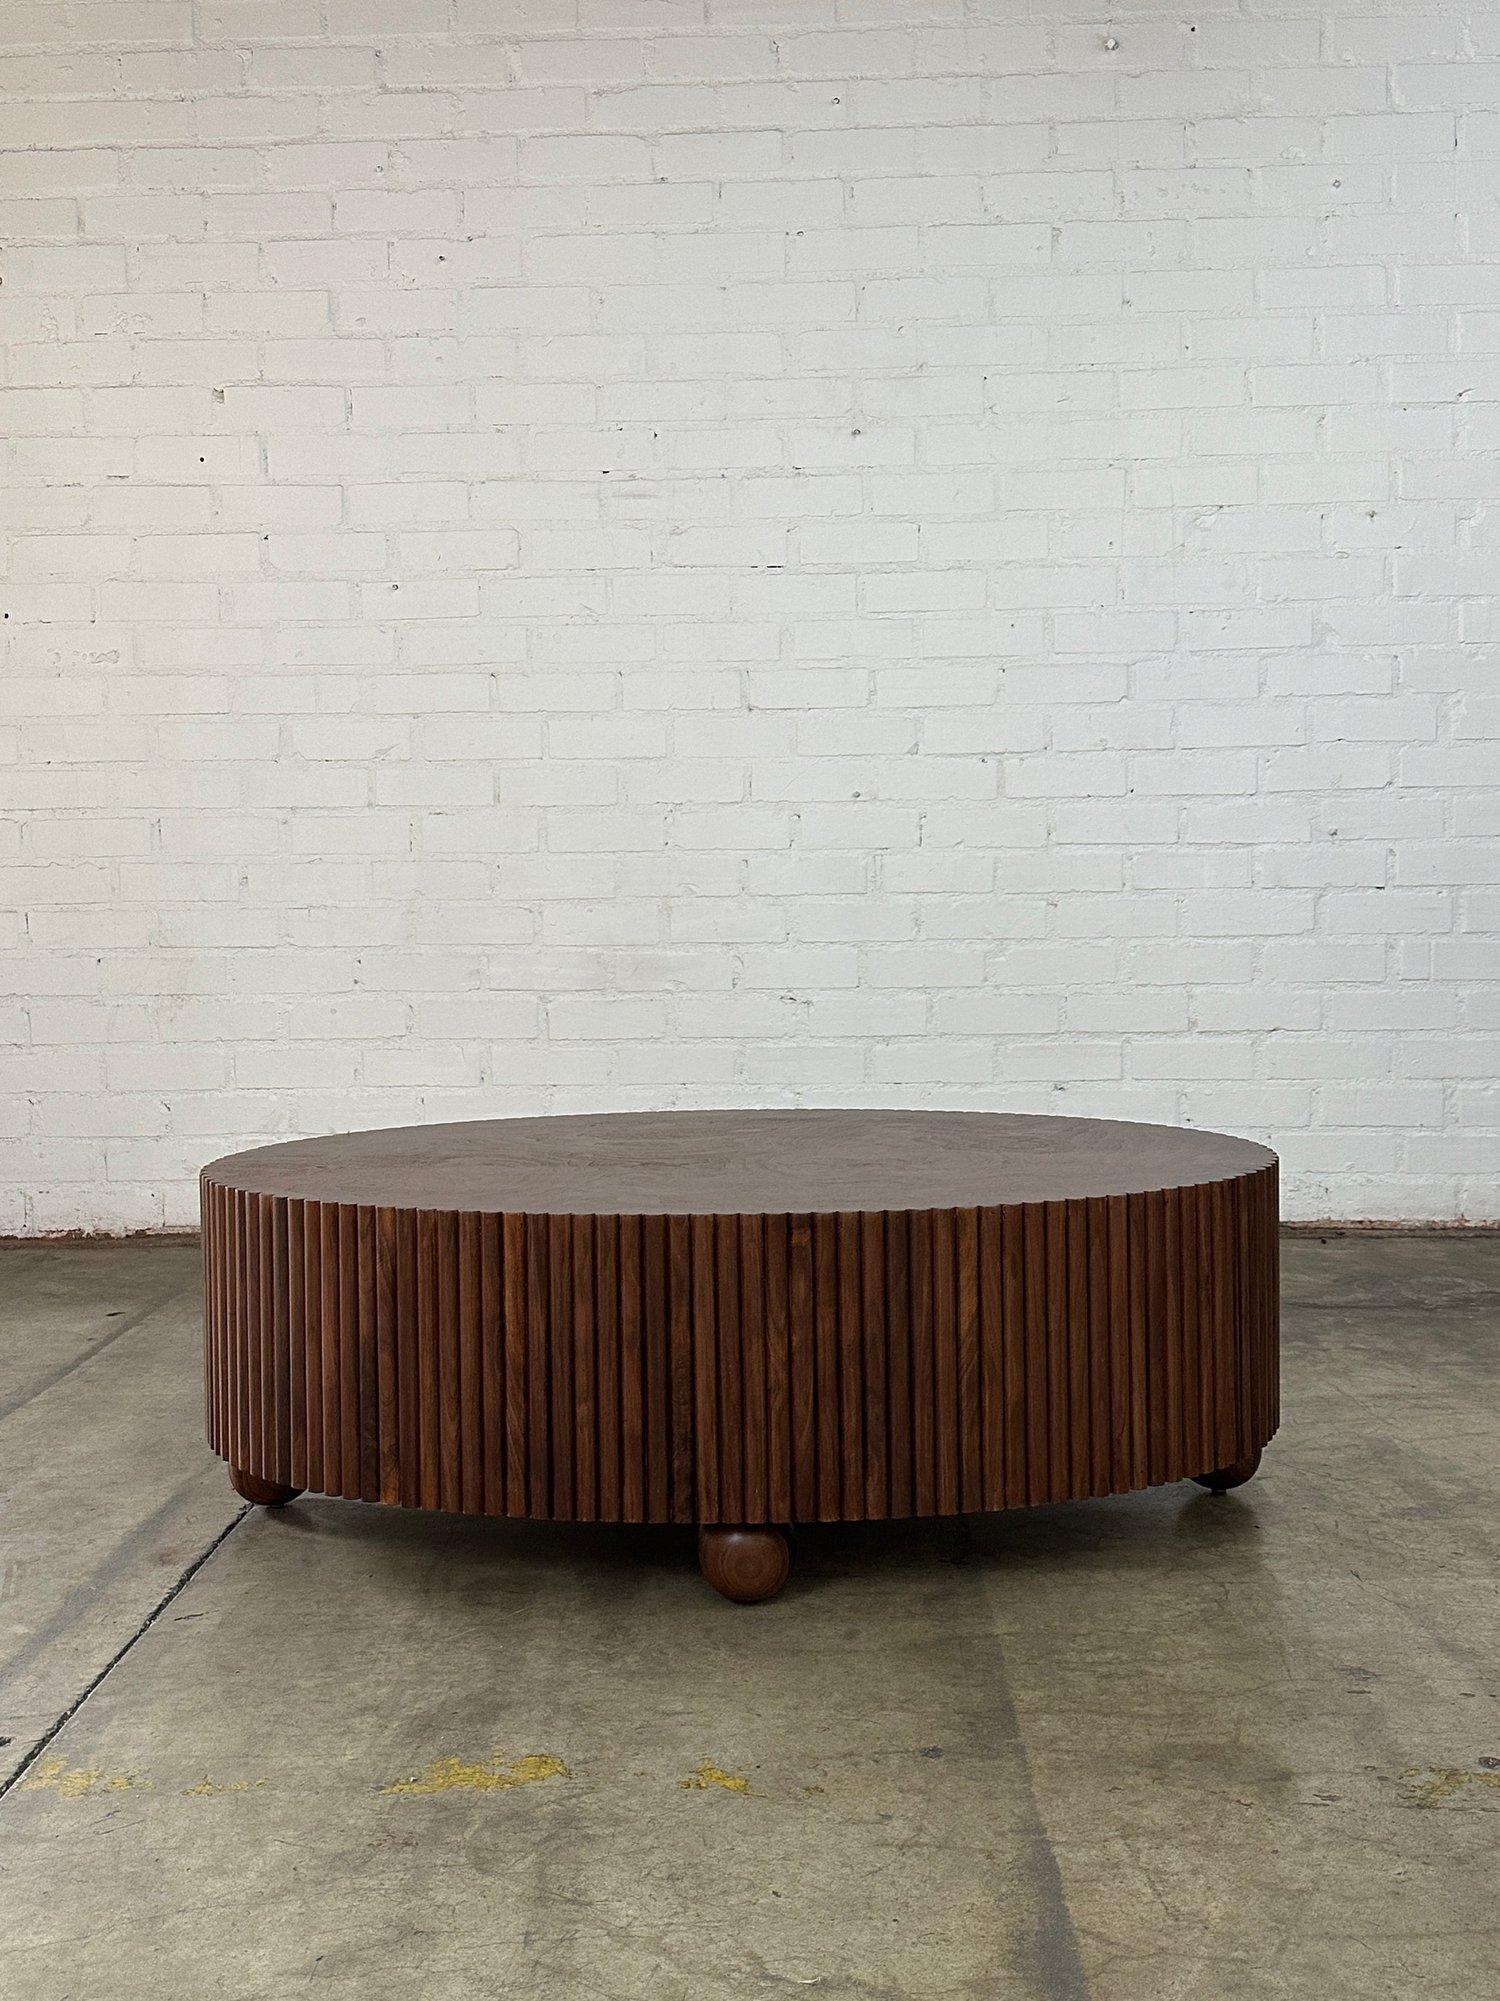 W53 D33.5 H17.5

Handcrafted walnut coffee table in a mix of solid walnuts and veneers. Item features ribbed sides, solid walnut ball legs, and a very nice surface in walnut Burl Wood Veneer. Item was handcrafted in house. 